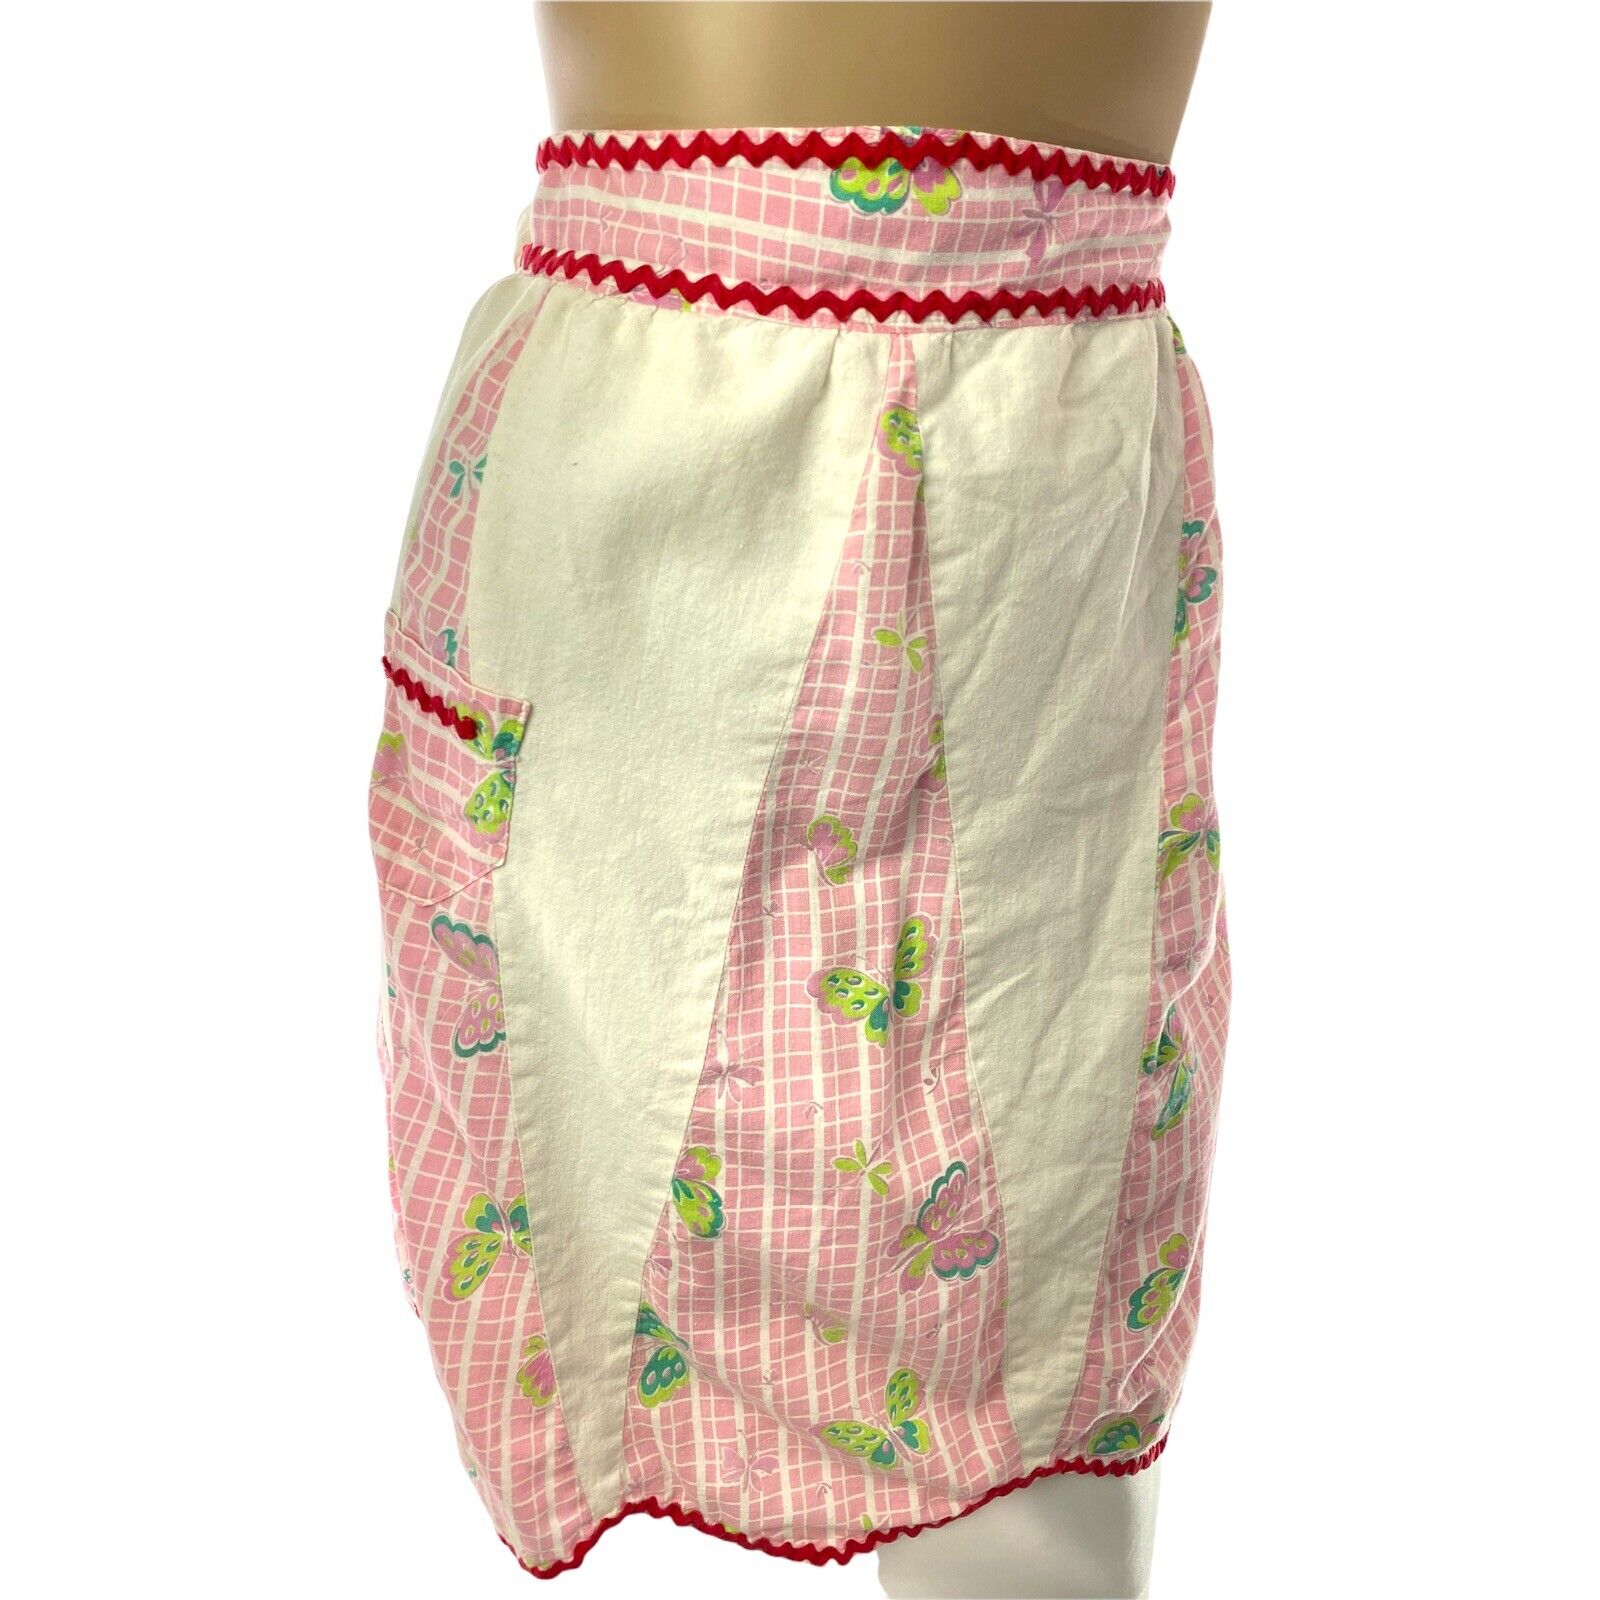 Vintage Cotton Apron Pink/Green/White Butterfly Pattern Red RickRack Trim